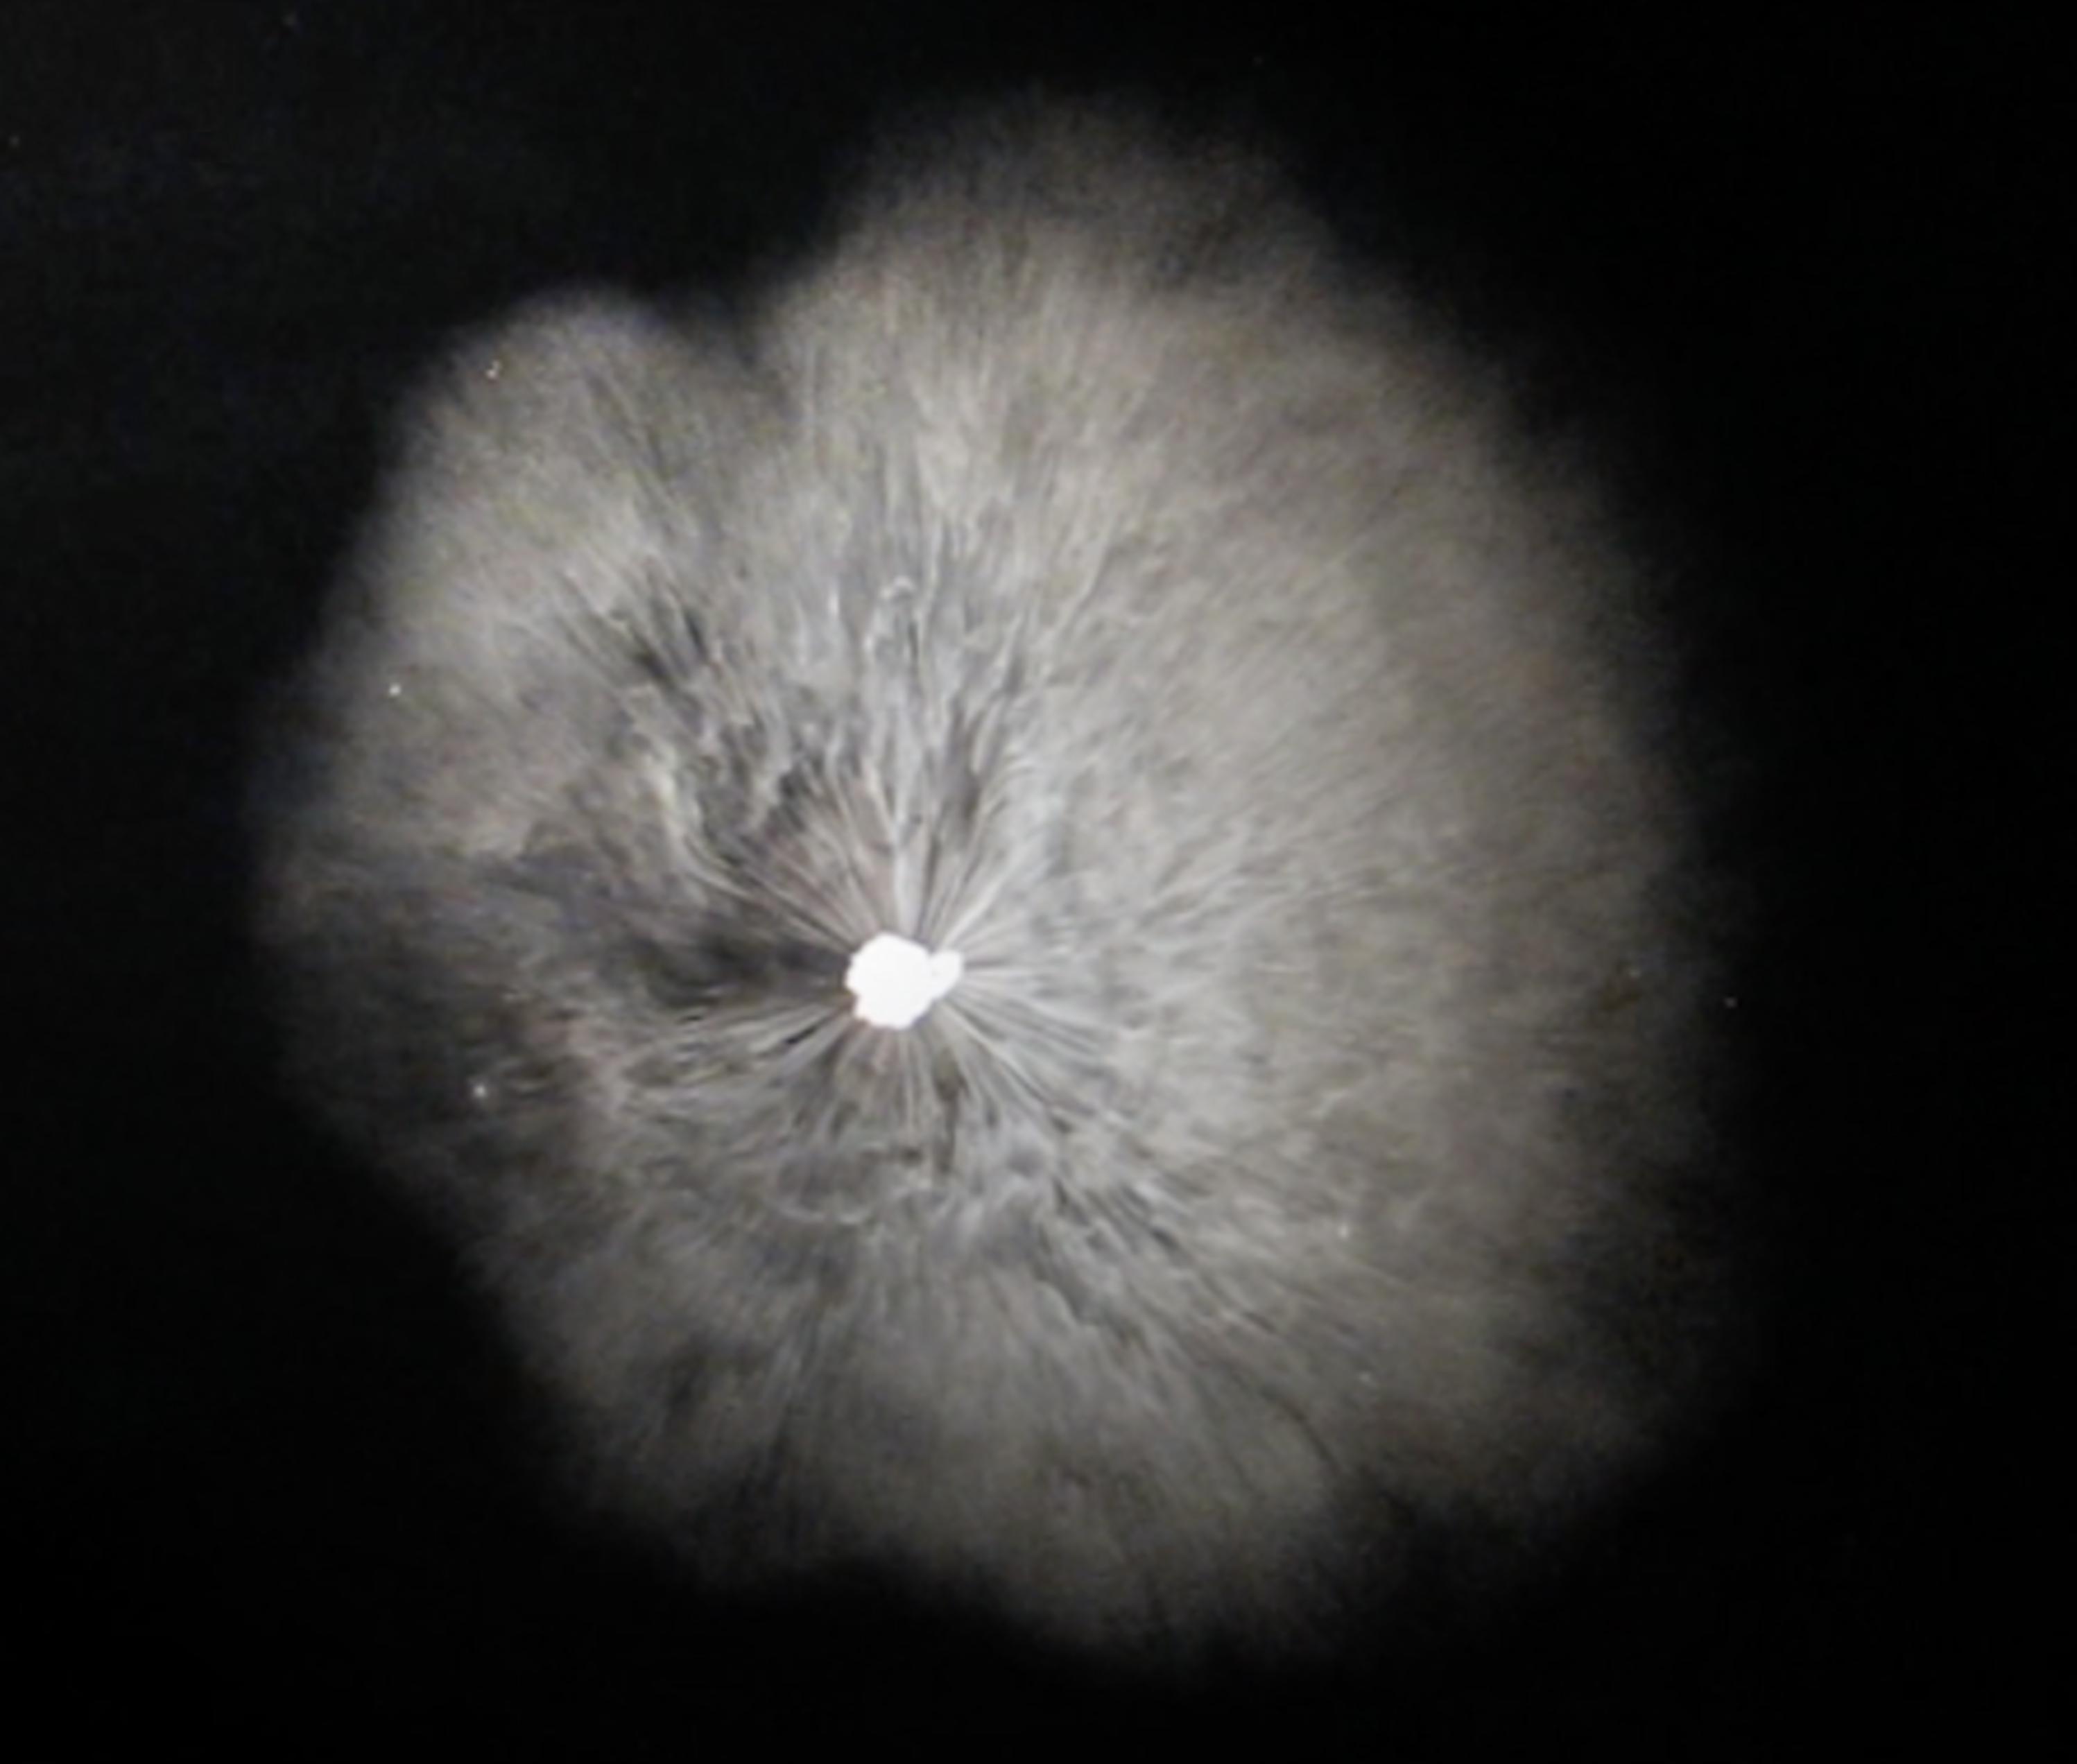 Just right of center, an organic round shape in a hazy light gray seems to emerge from a jet black background. It hovers around or behind a bright white spot at its center.